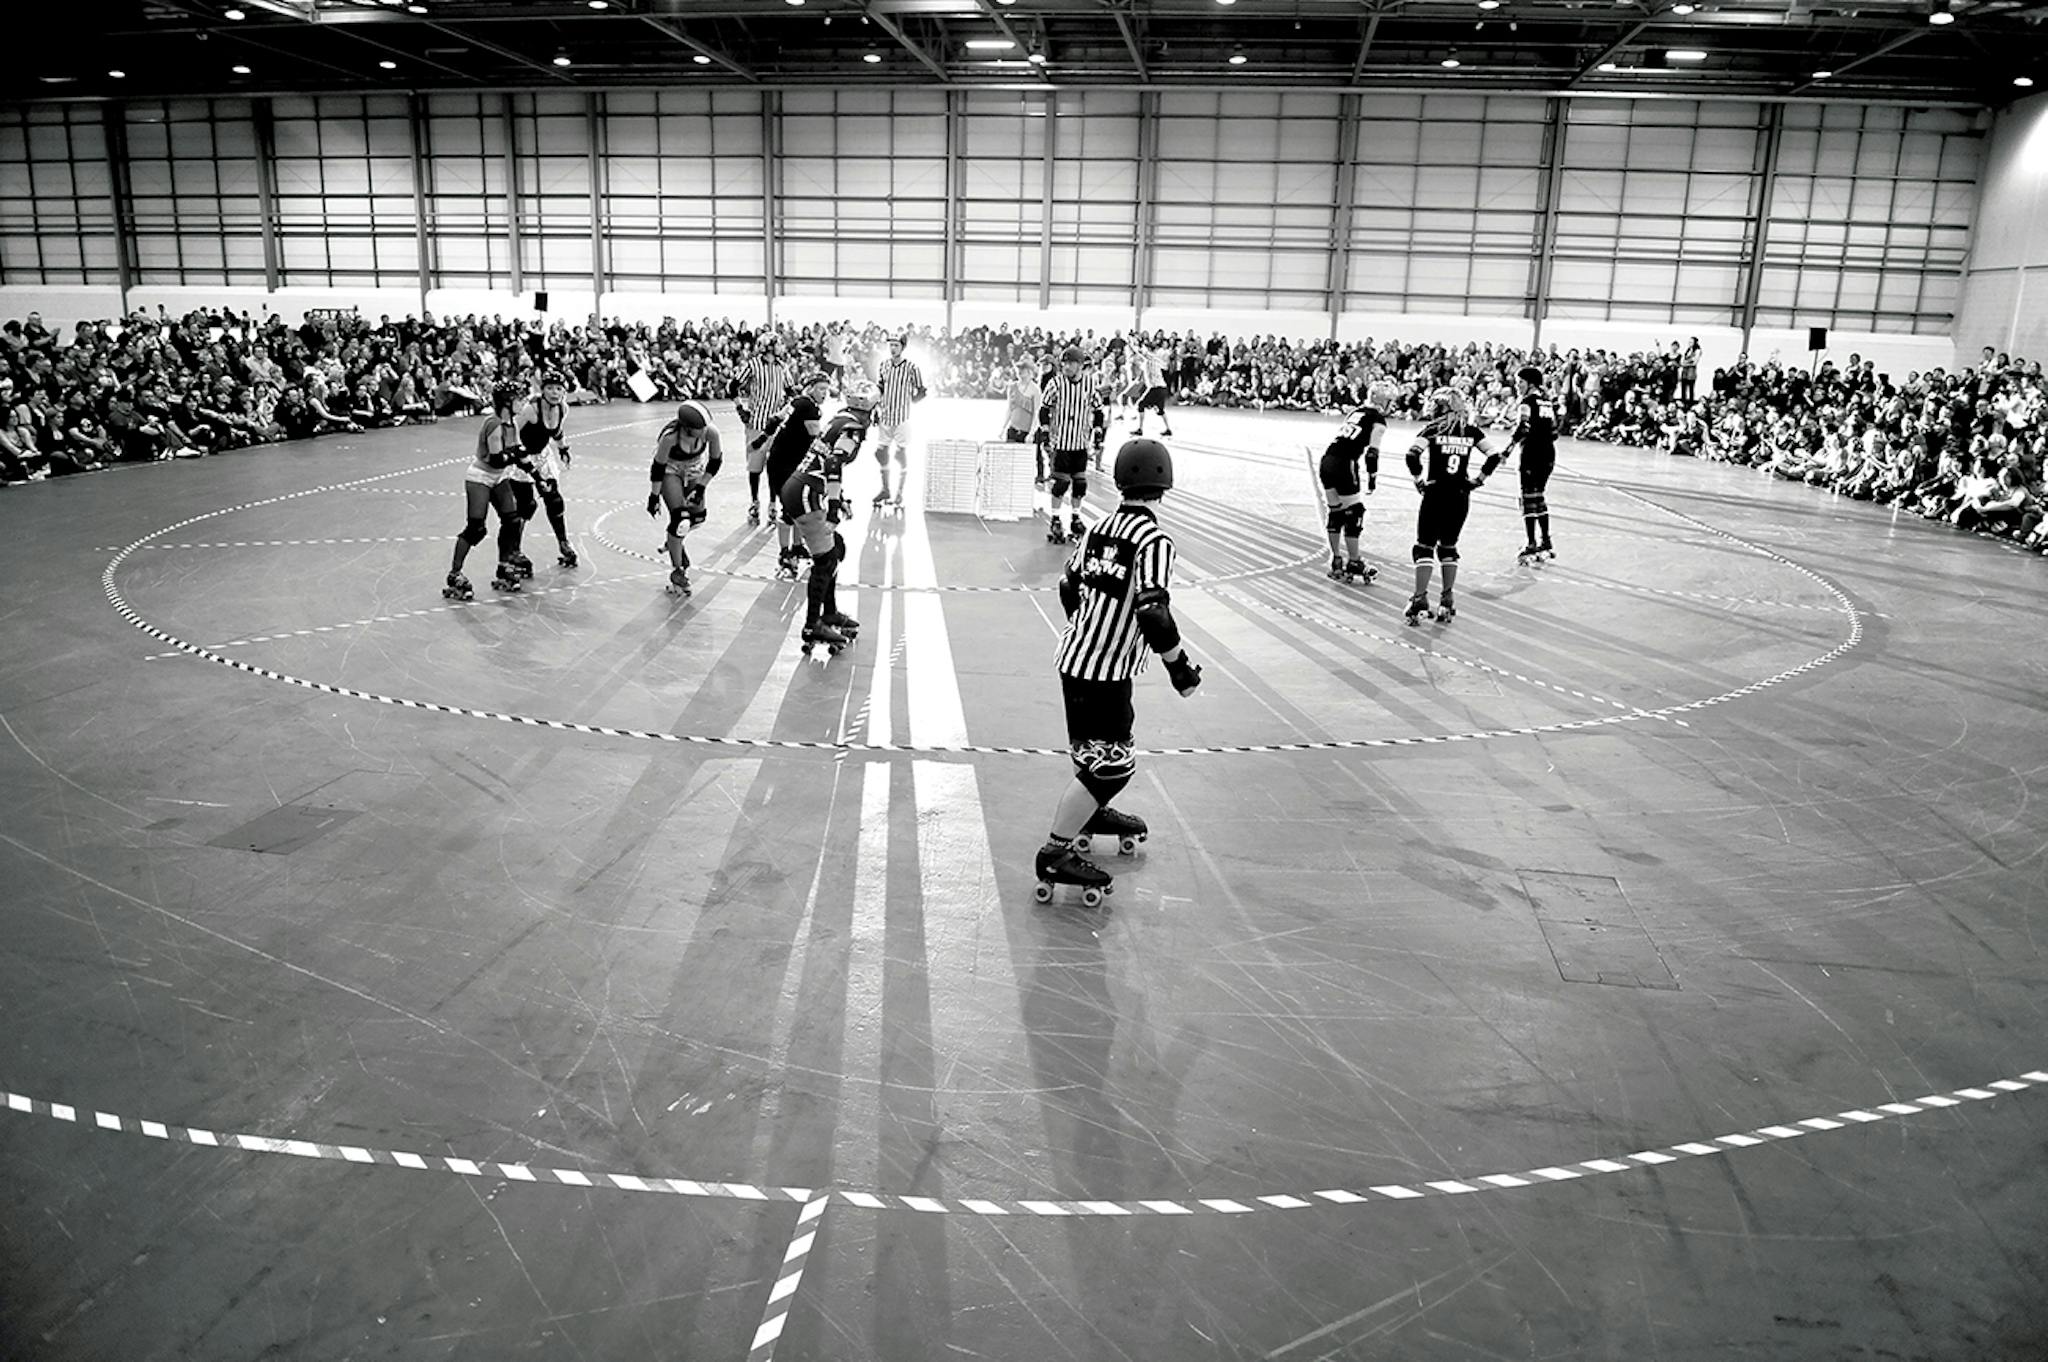 The Hustlers skating at a tournament in London